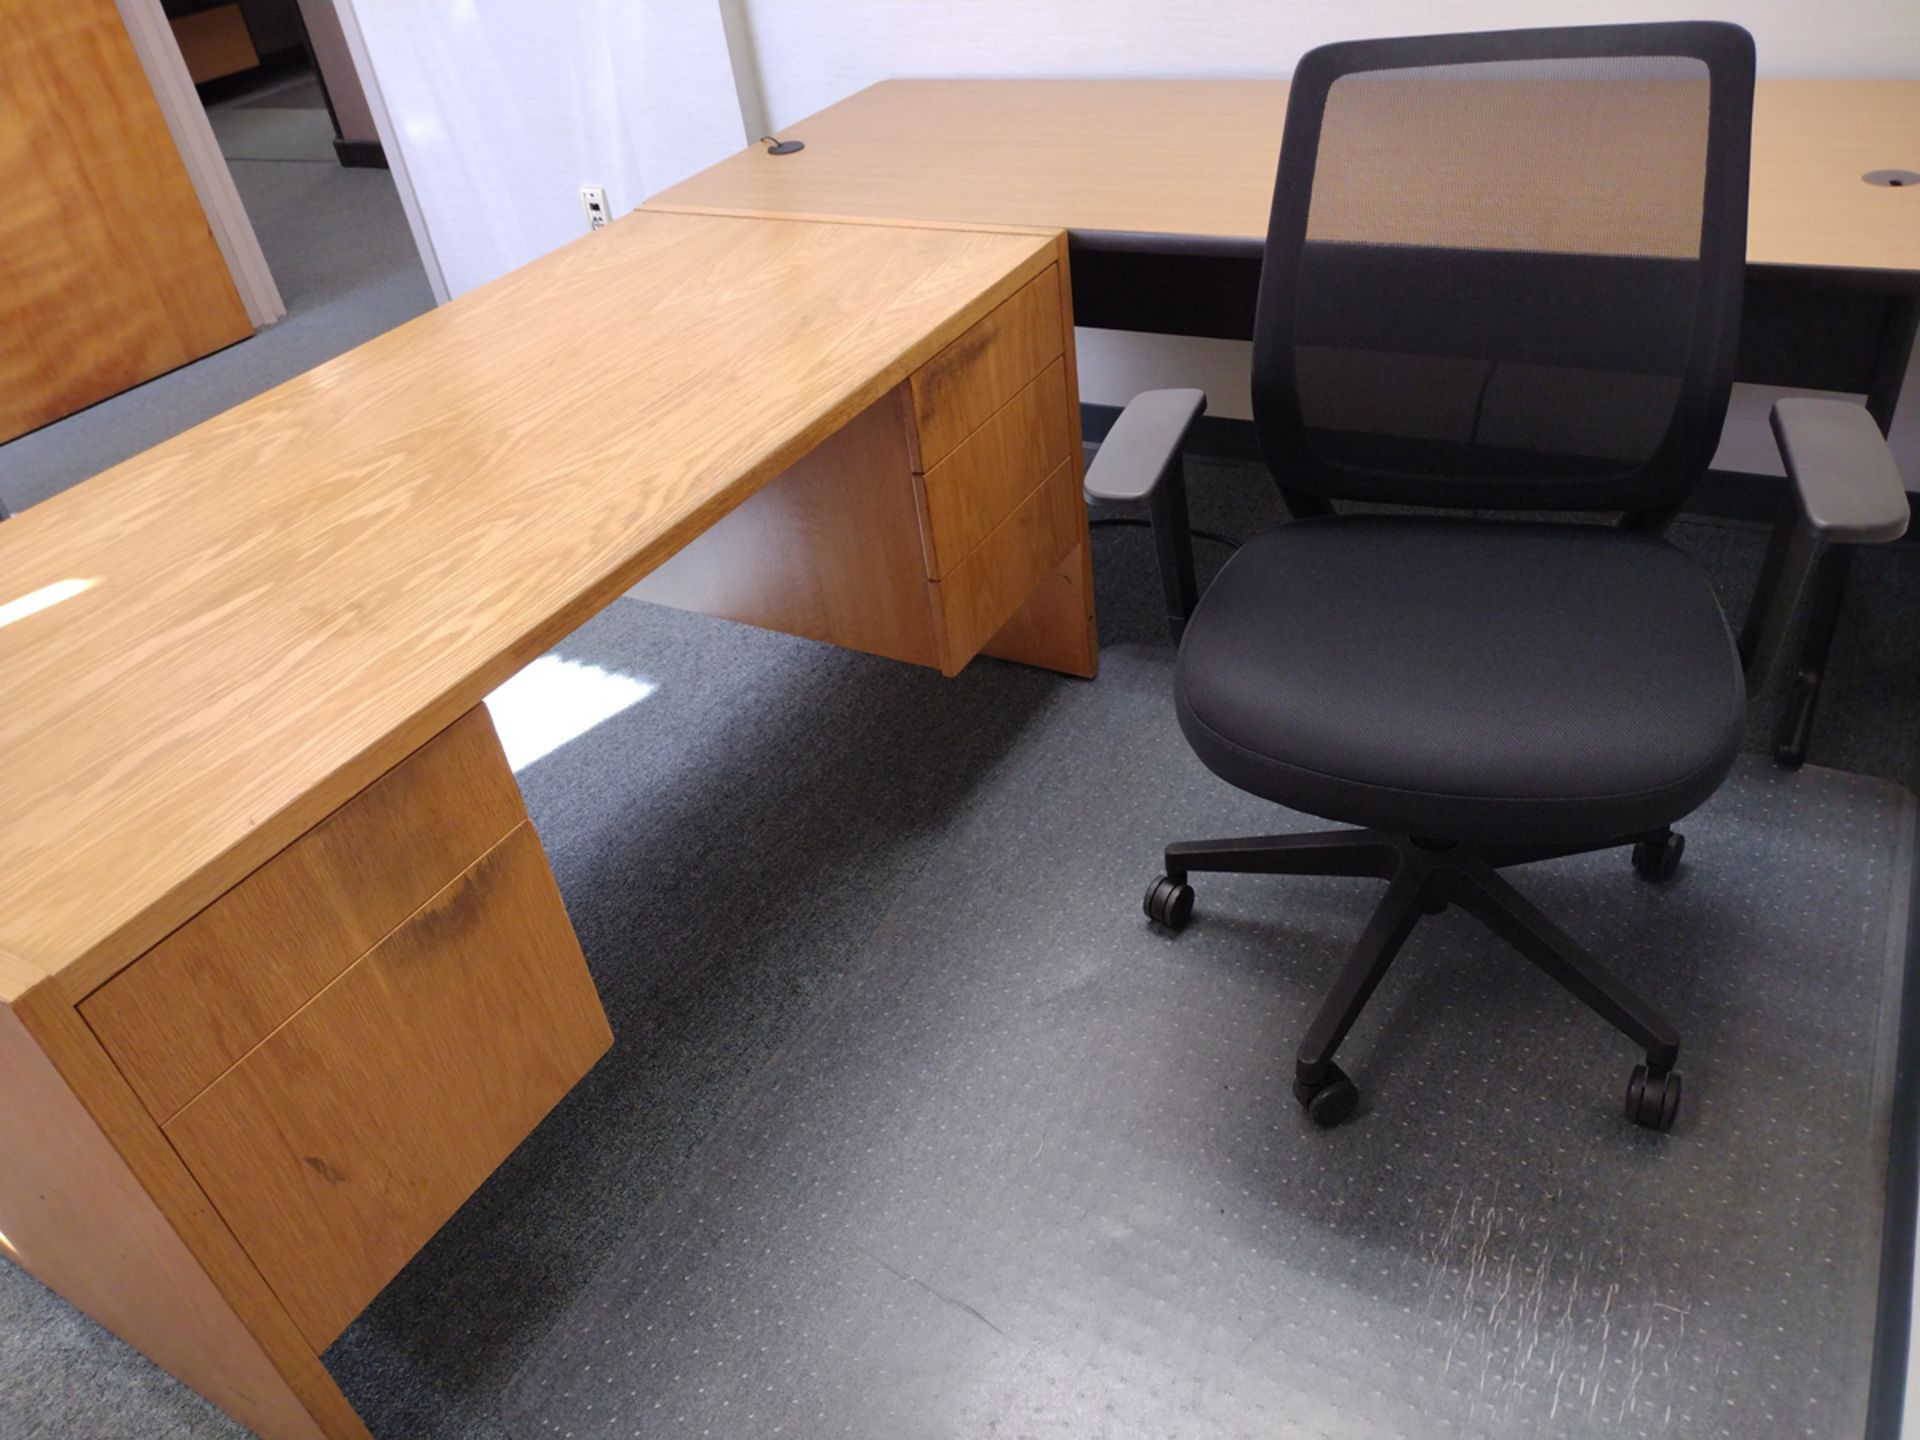 Group of Office Furniture Throughout Rooms - Image 10 of 14